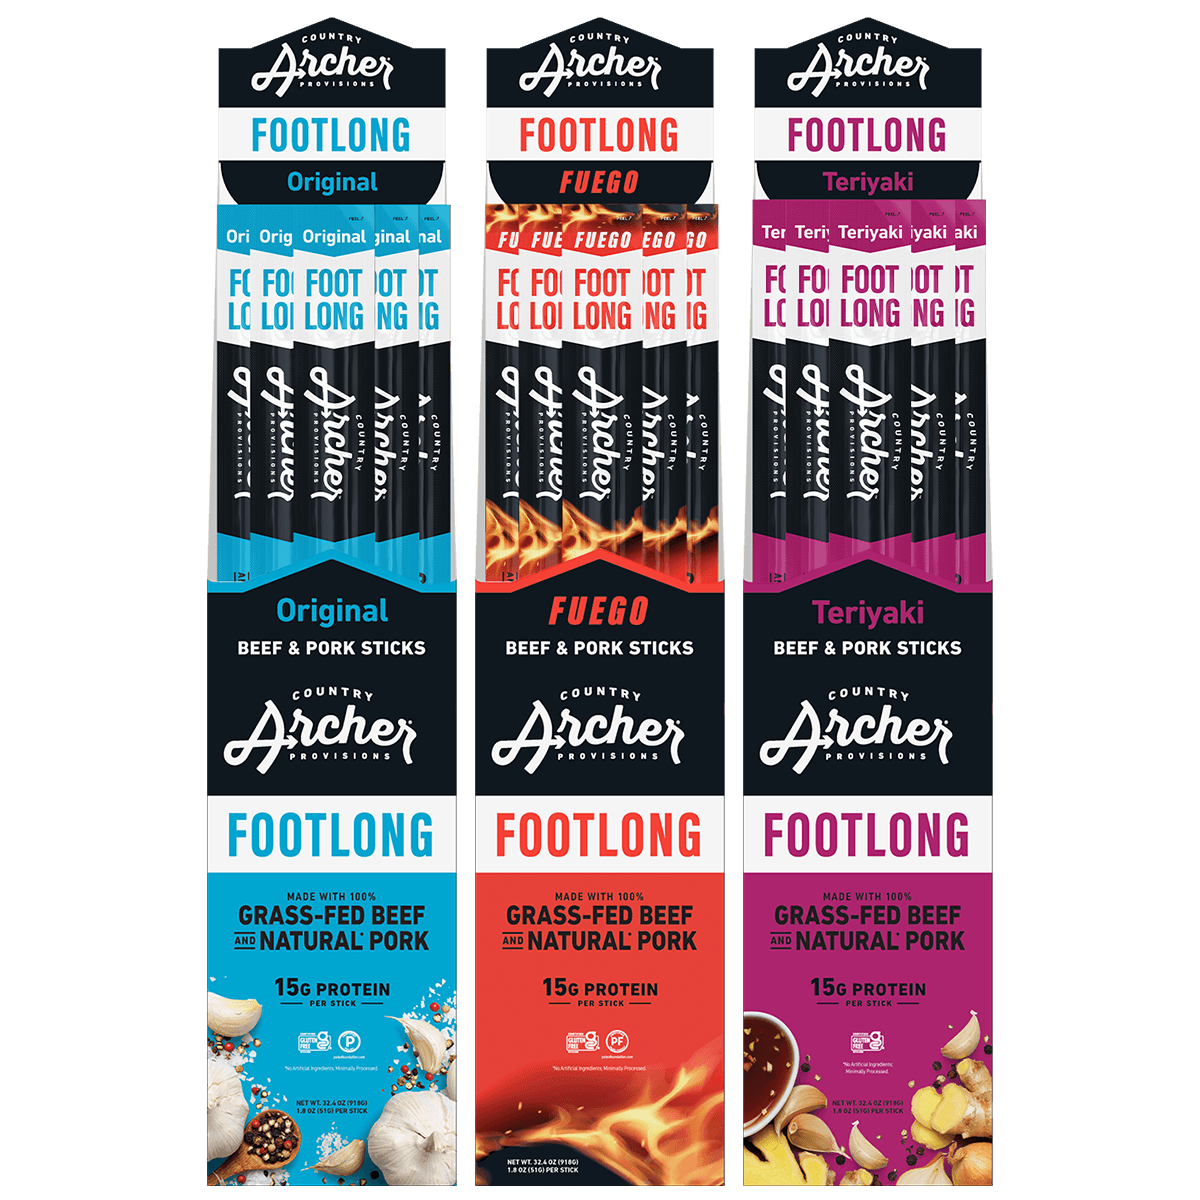  Footlong Meat Stick Variety Pack by Country Archer, Footlong Meat Stick Variety Pack, Bee, footlong-variety-pack-1, , 